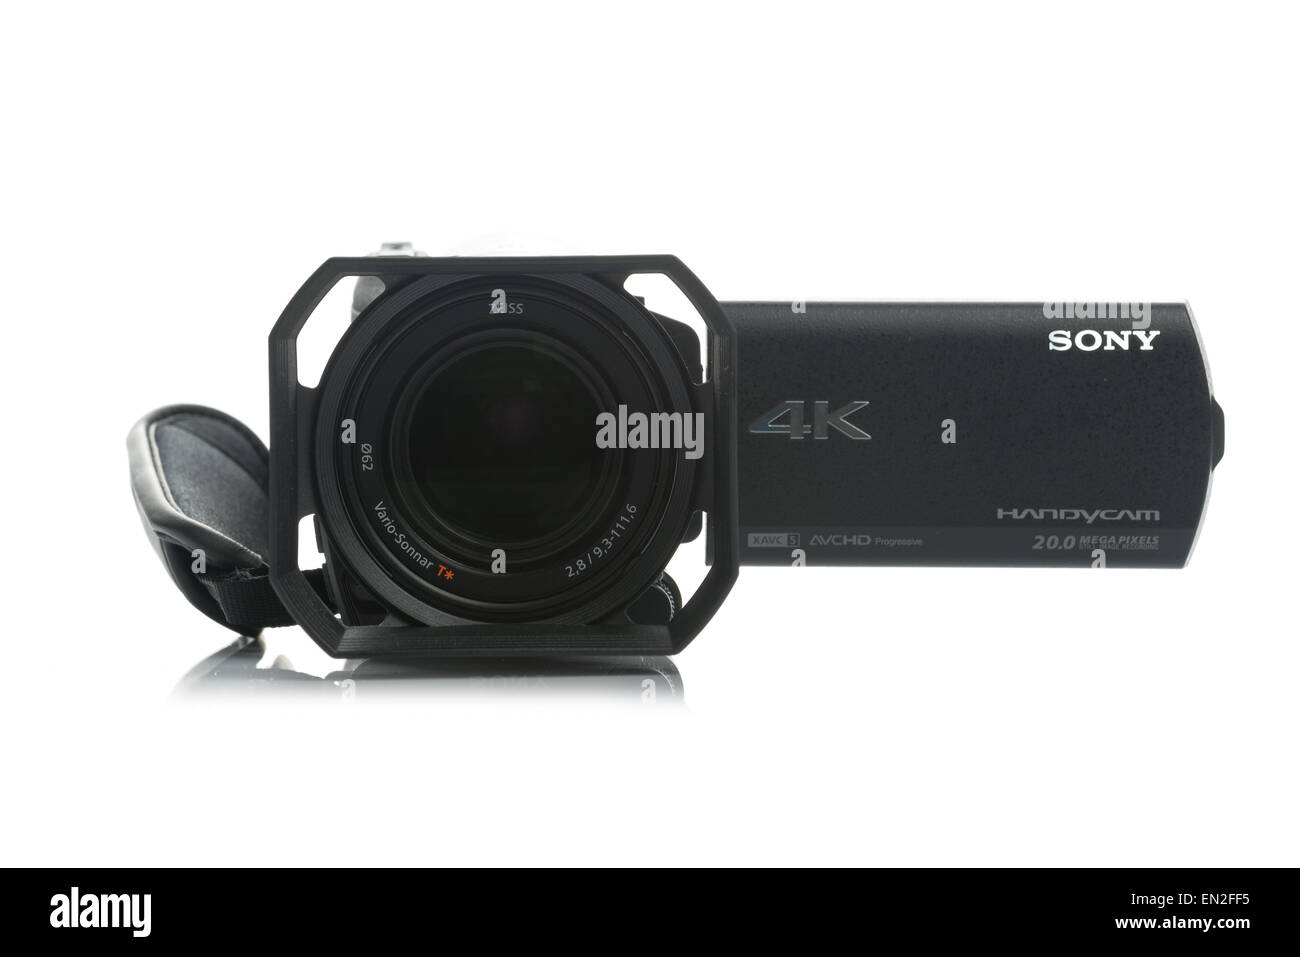 NOVI SAD, SERBIA - APRIL 25, 2015: Sony FDR AX100 4k Handycam Camcorder (announced in 2014.) captures Ultra High Definition Foot Stock Photo